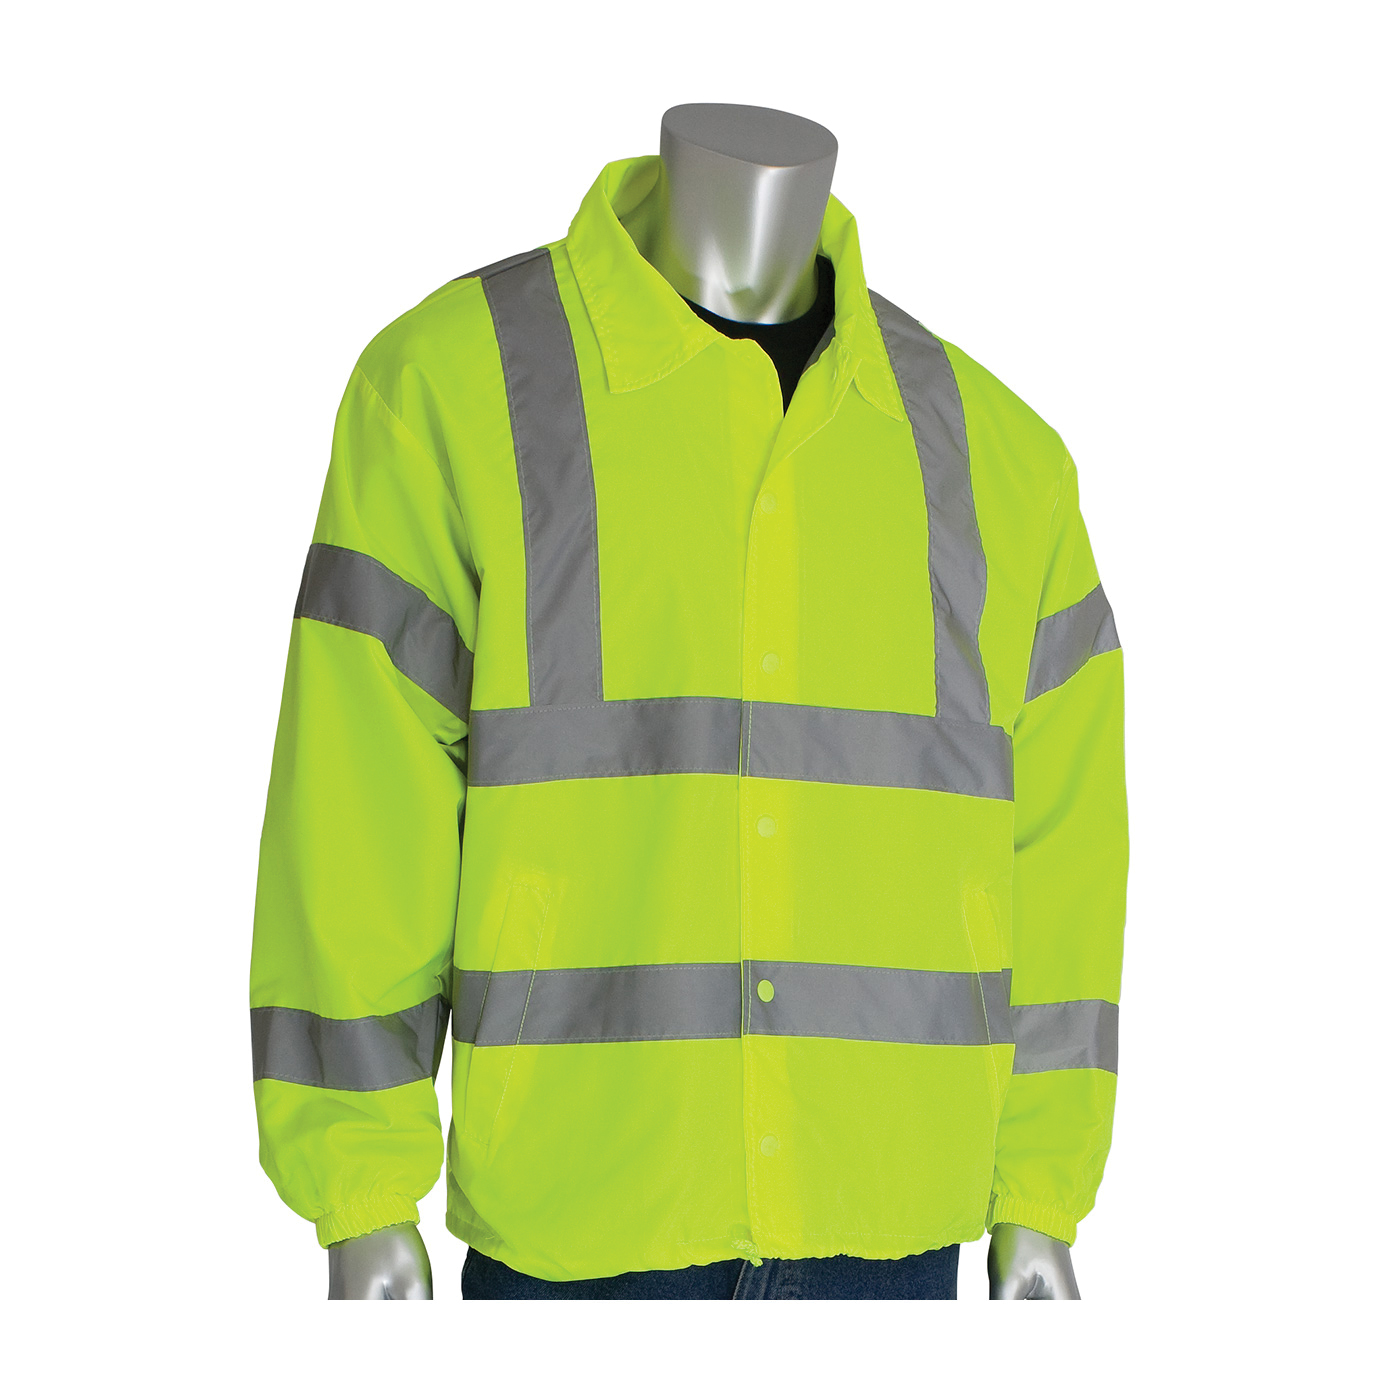 PIP® 333-WBLY-3X Classic Wind Breaker Jacket, Hi-Viz Lime Yellow, Polyester, 59.8 in Chest, Specifications Met: ANSI 107 Class 3 Type R